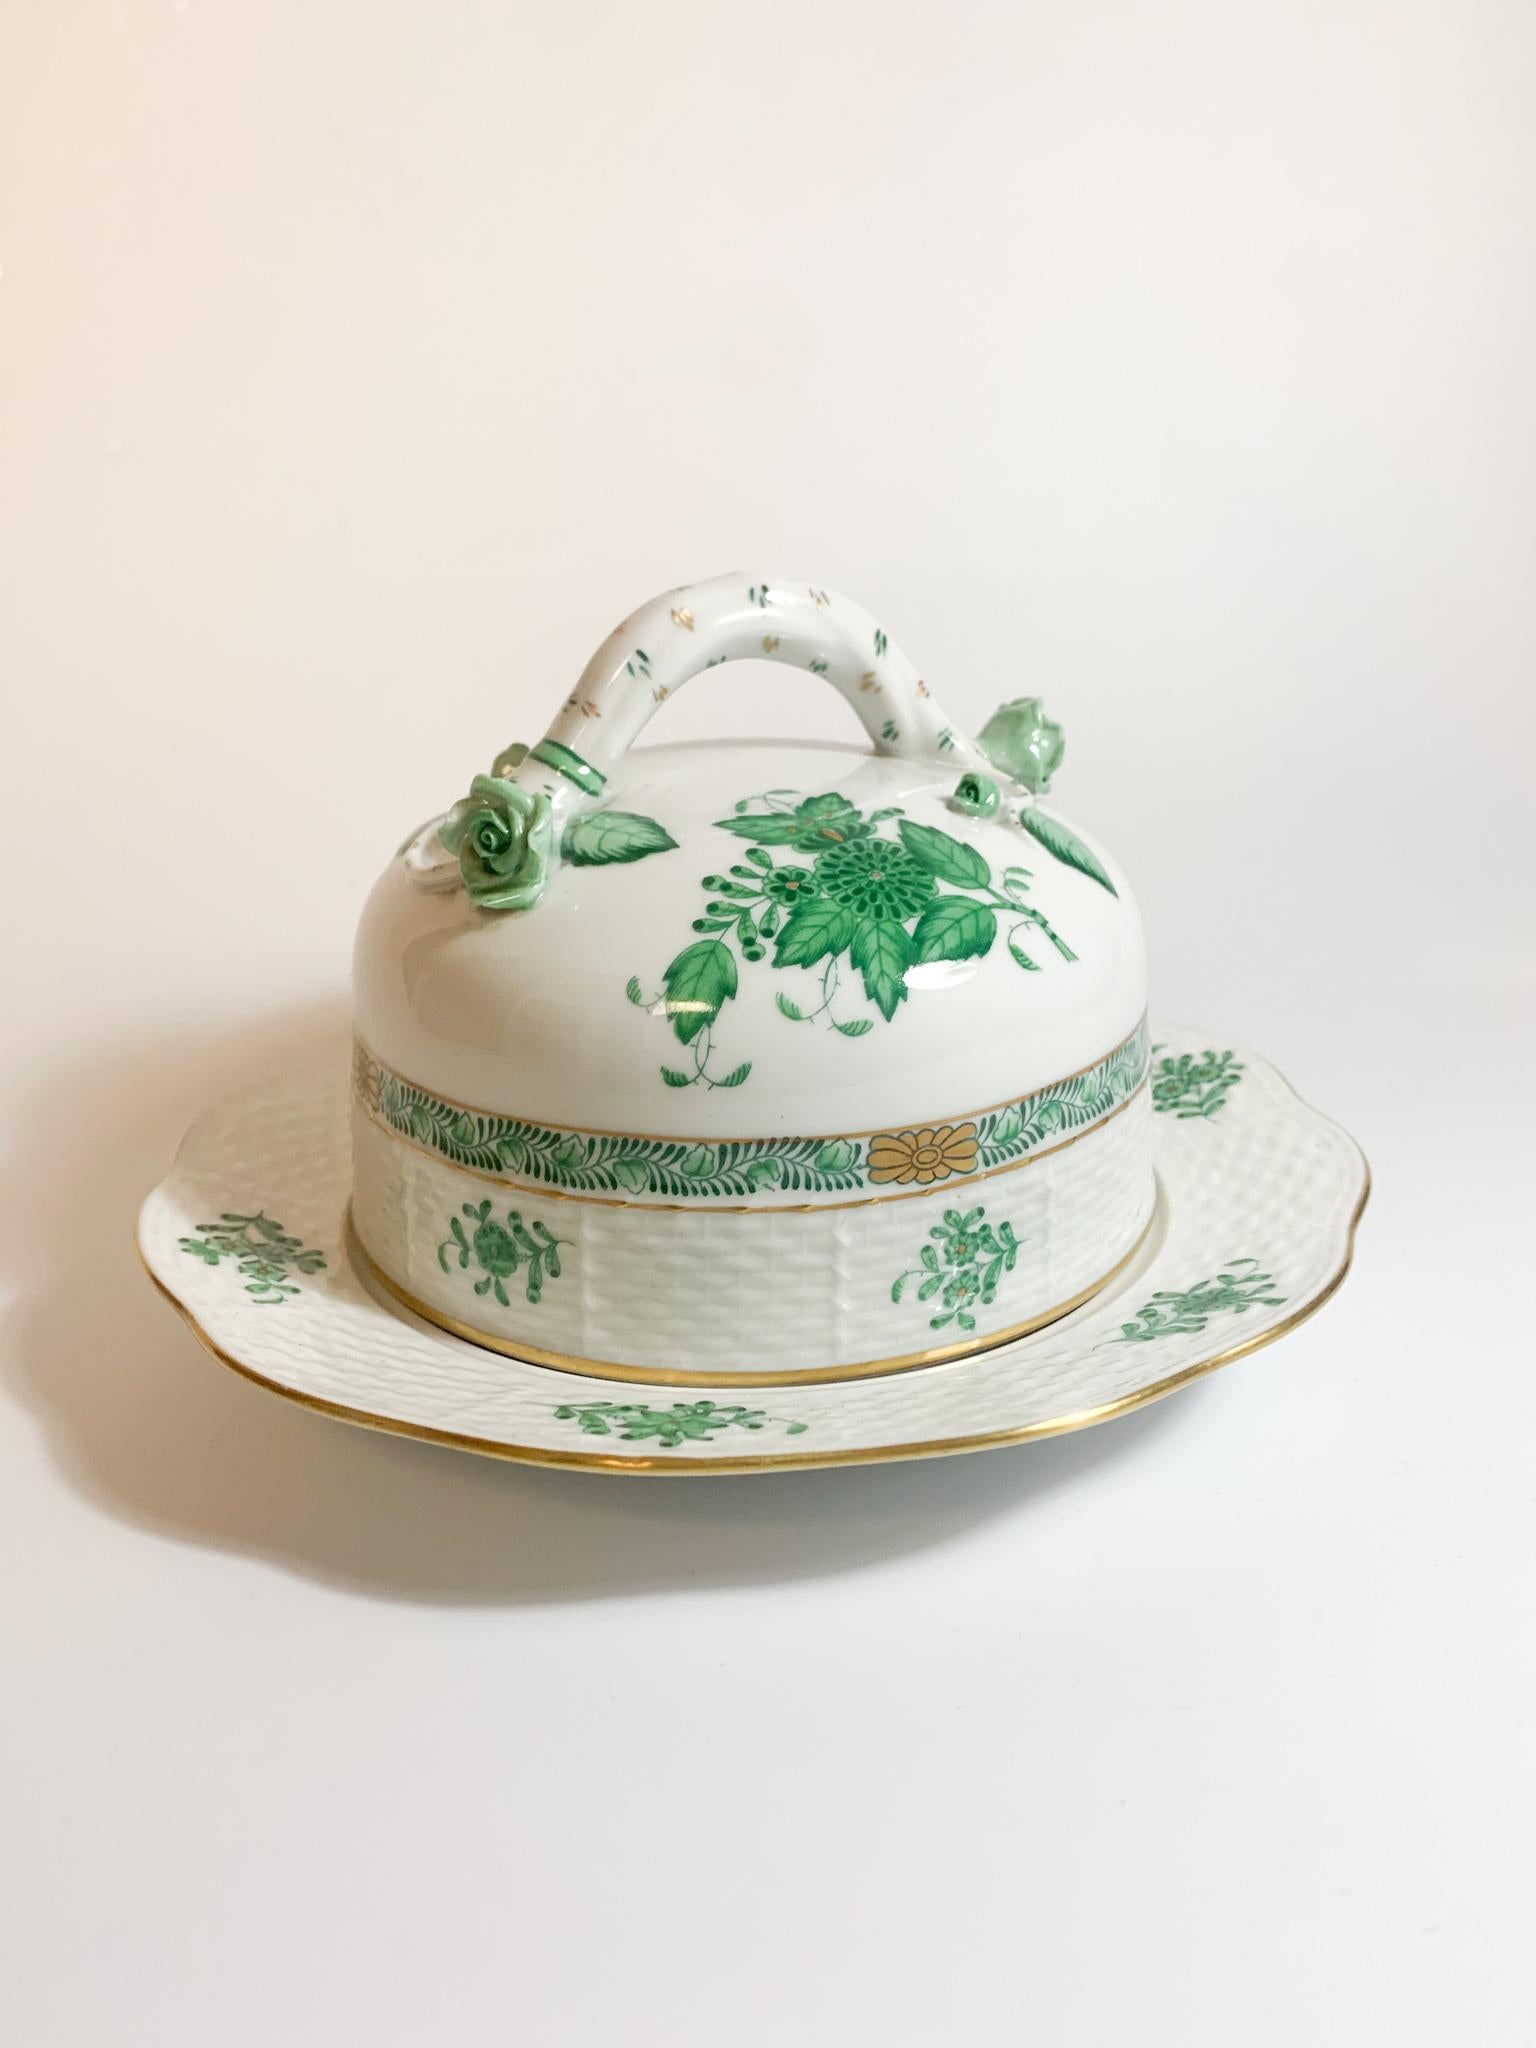 Herend porcelain butter dish / butter dish, with ivy motif, made in the 1950s

diameter cm 20 h cm 12